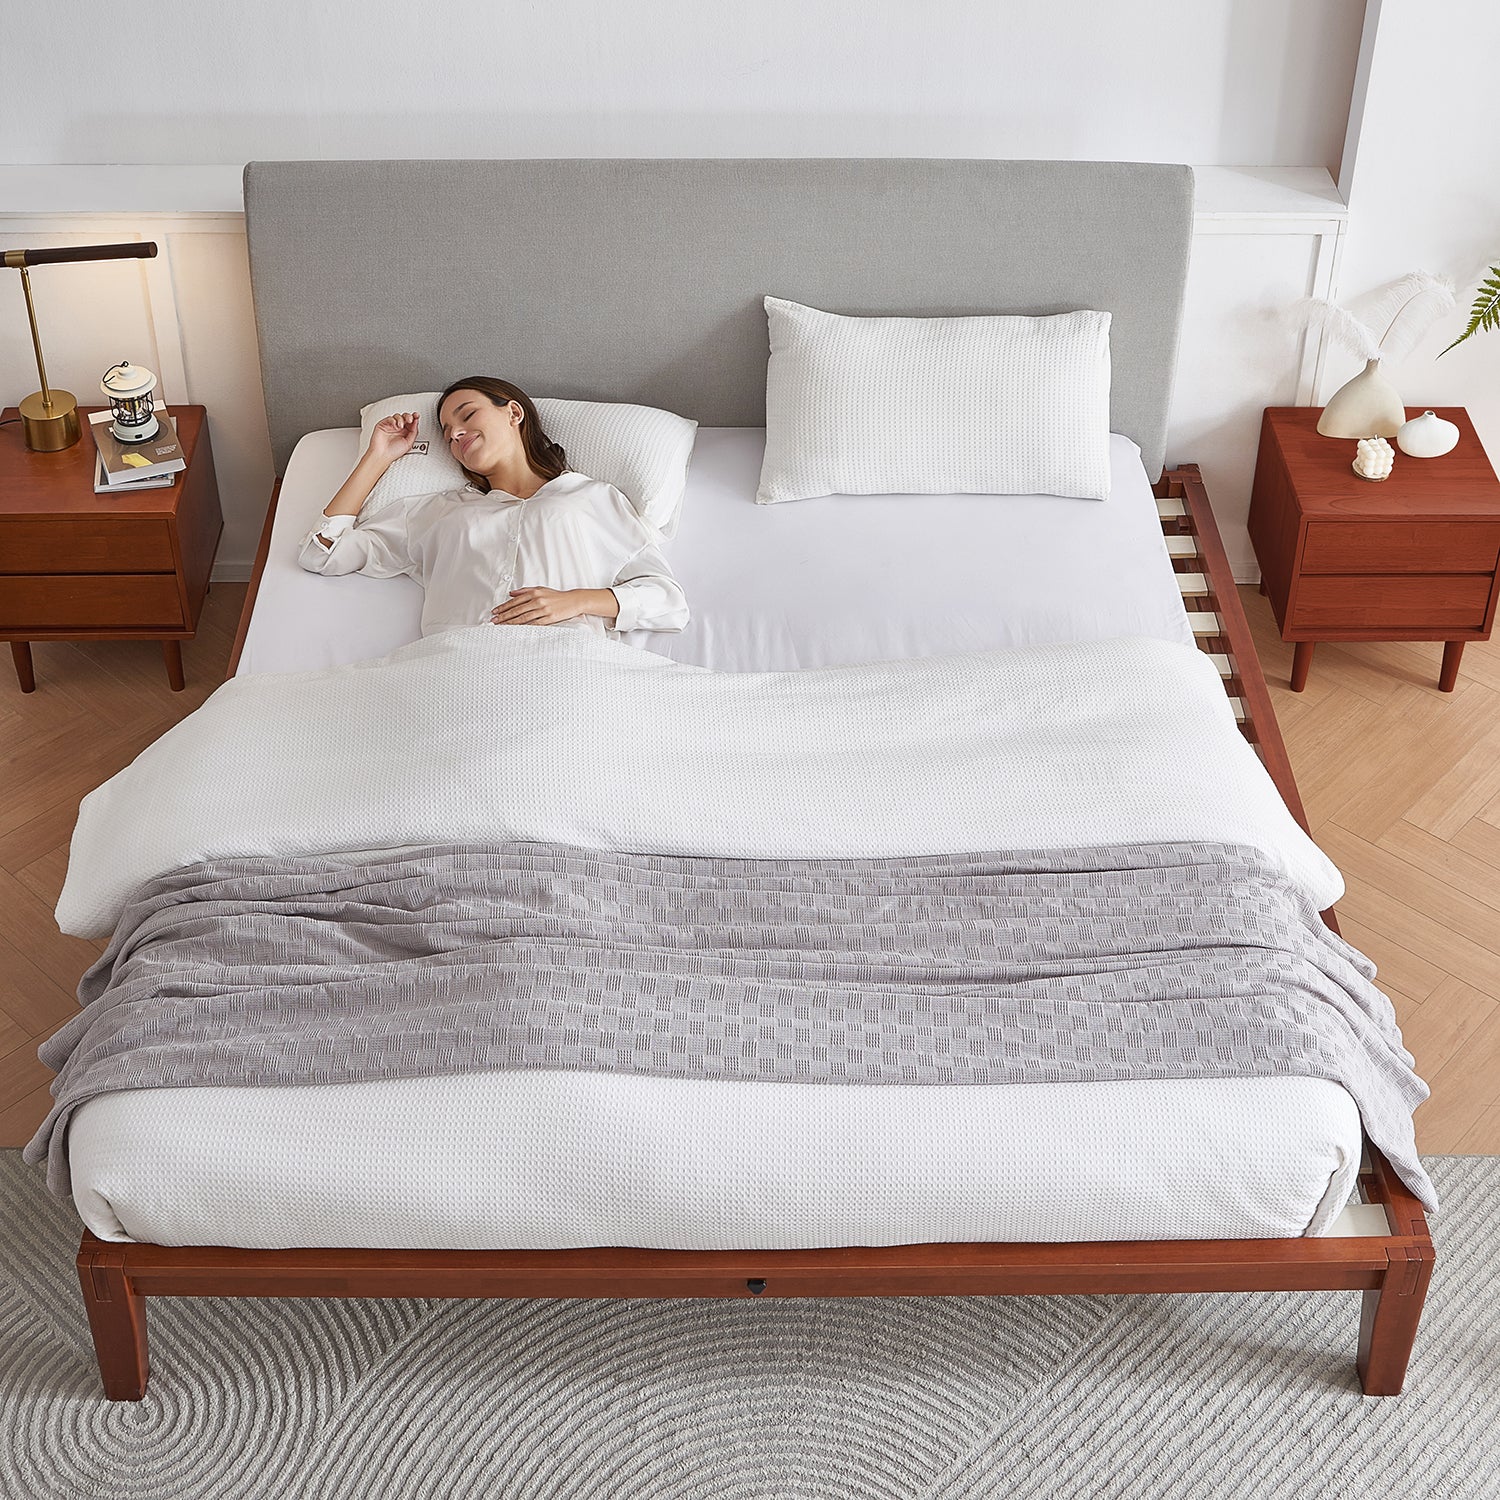 The Charm 2.0 Bed, Bed, OHDOME | Valyou Furniture 